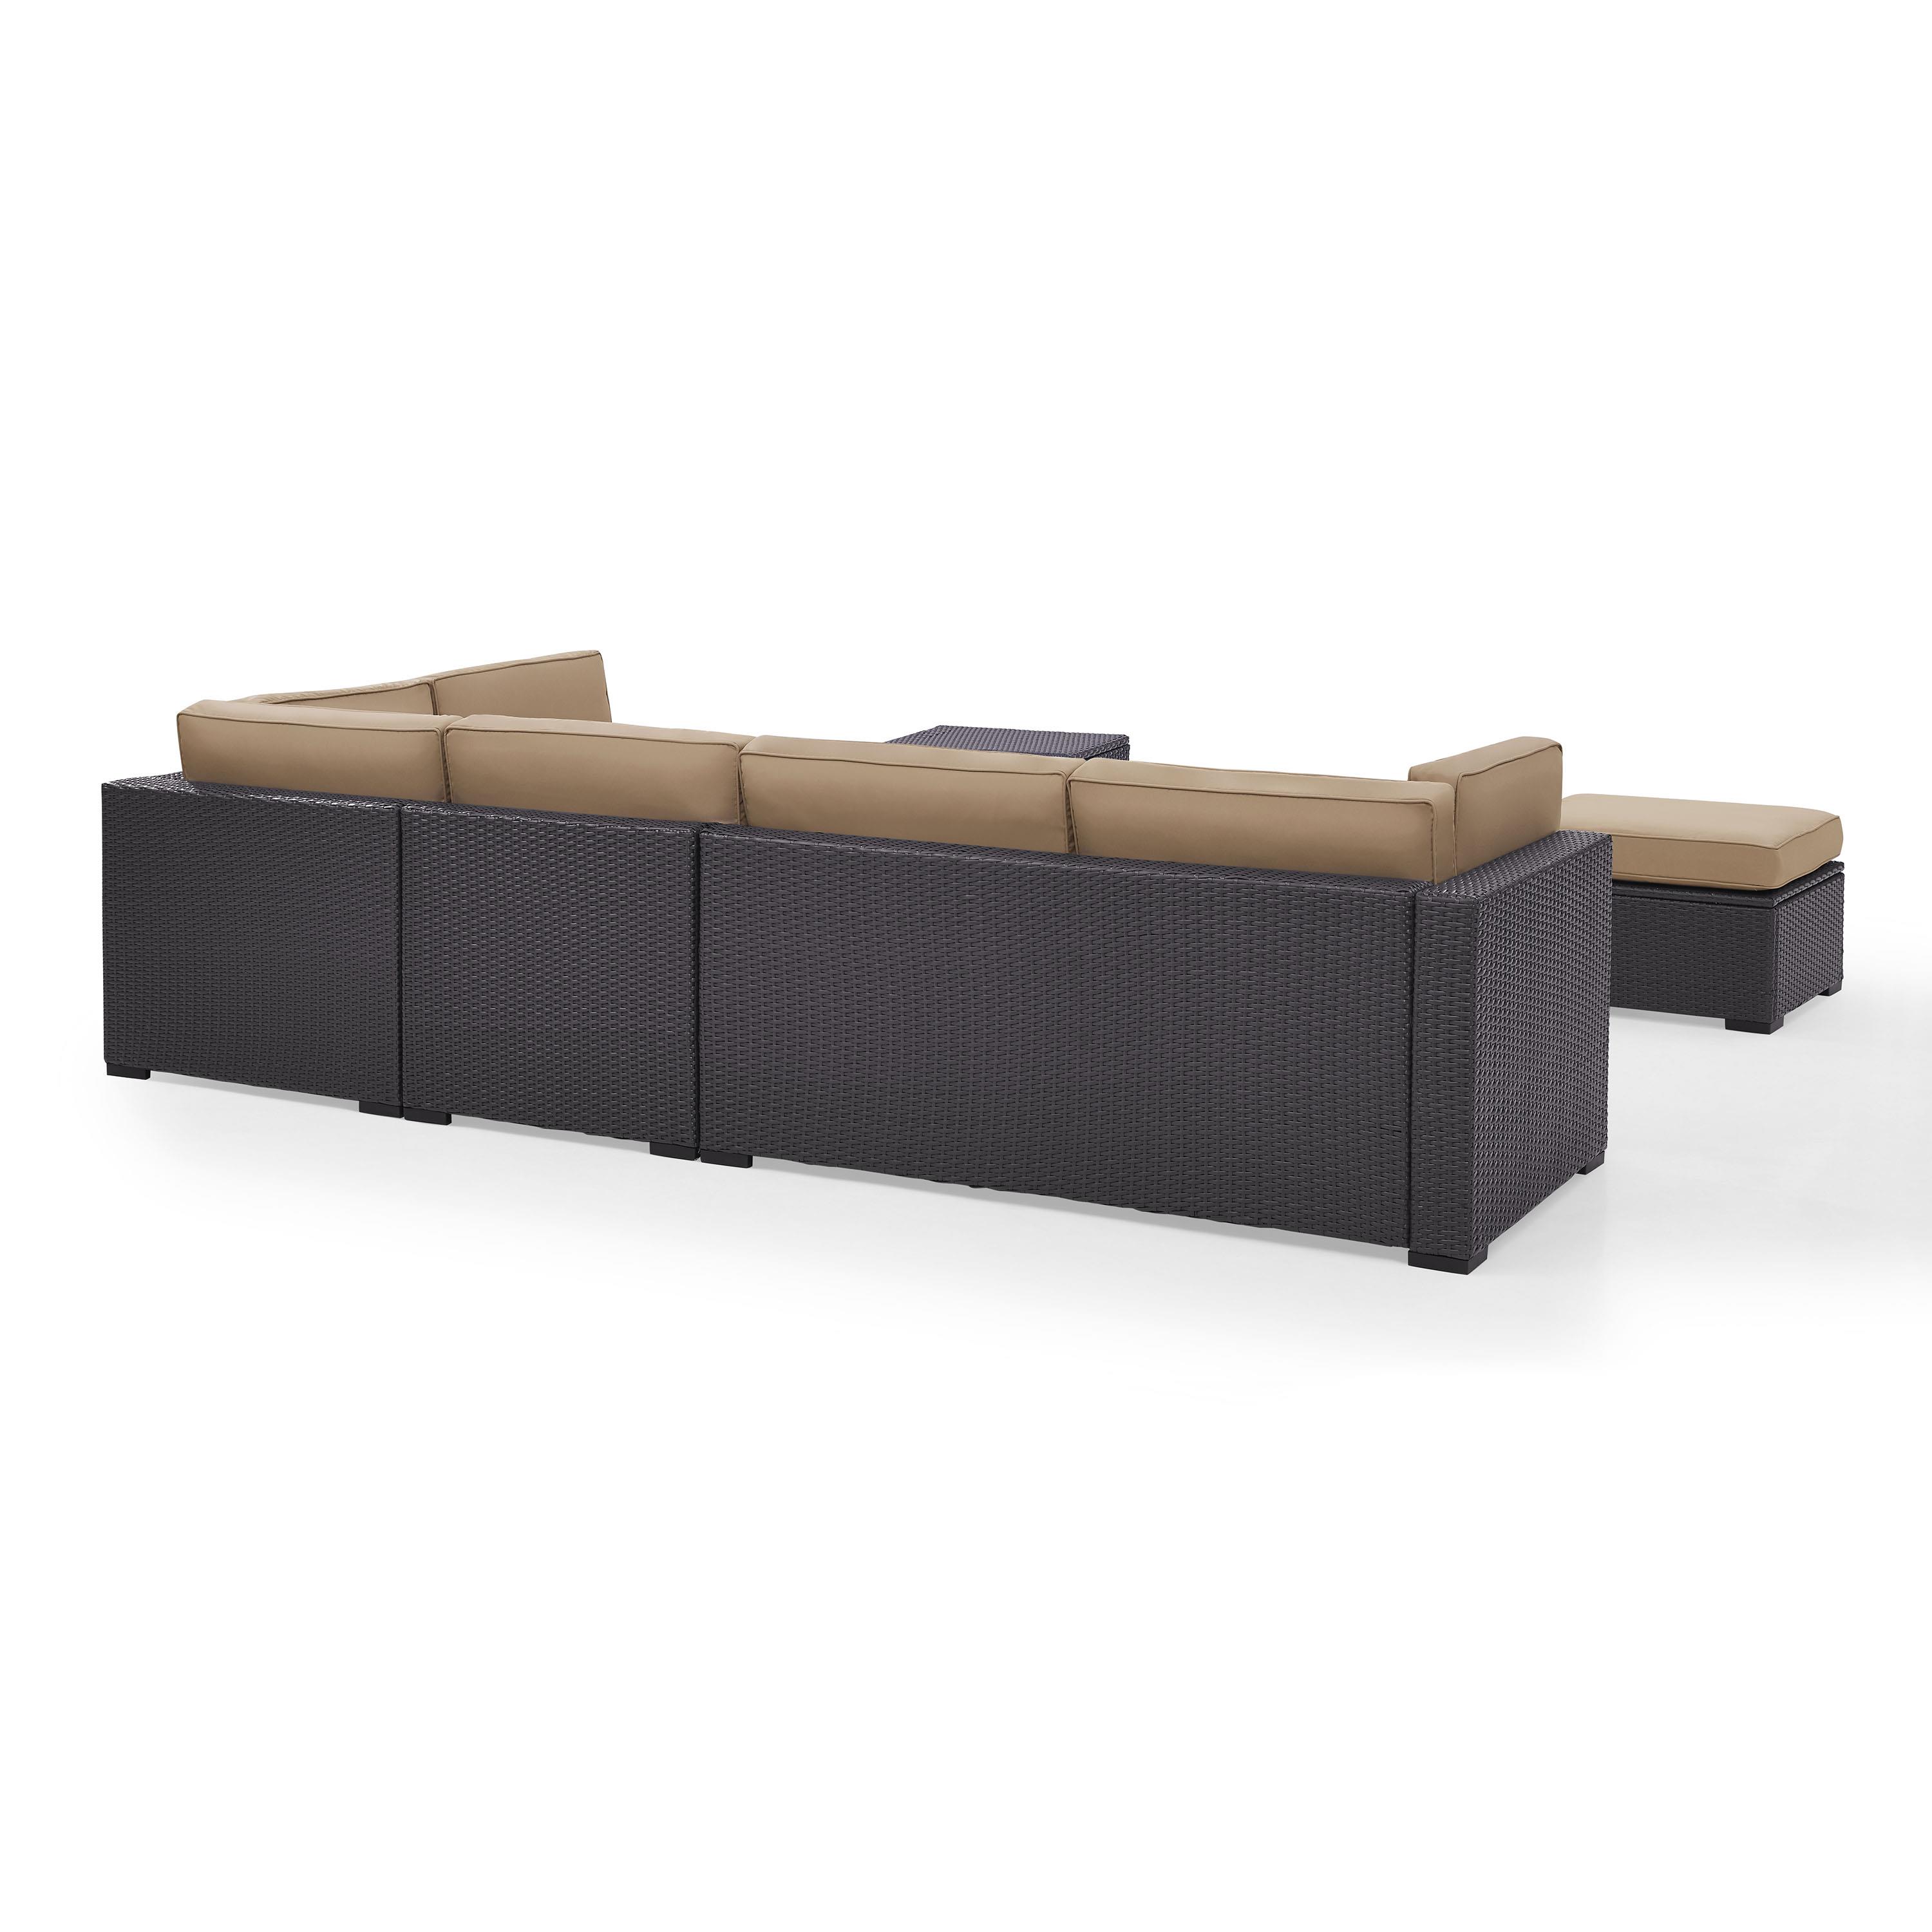 BISCAYNE 7 PERSON OUTDOOR WICKER SEATING SET IN MOCHA - TWO LOVESEATS, ONE ARMLESS CHAIR, COFFEE TABLE, TWO OTTOMANS - image 3 of 4